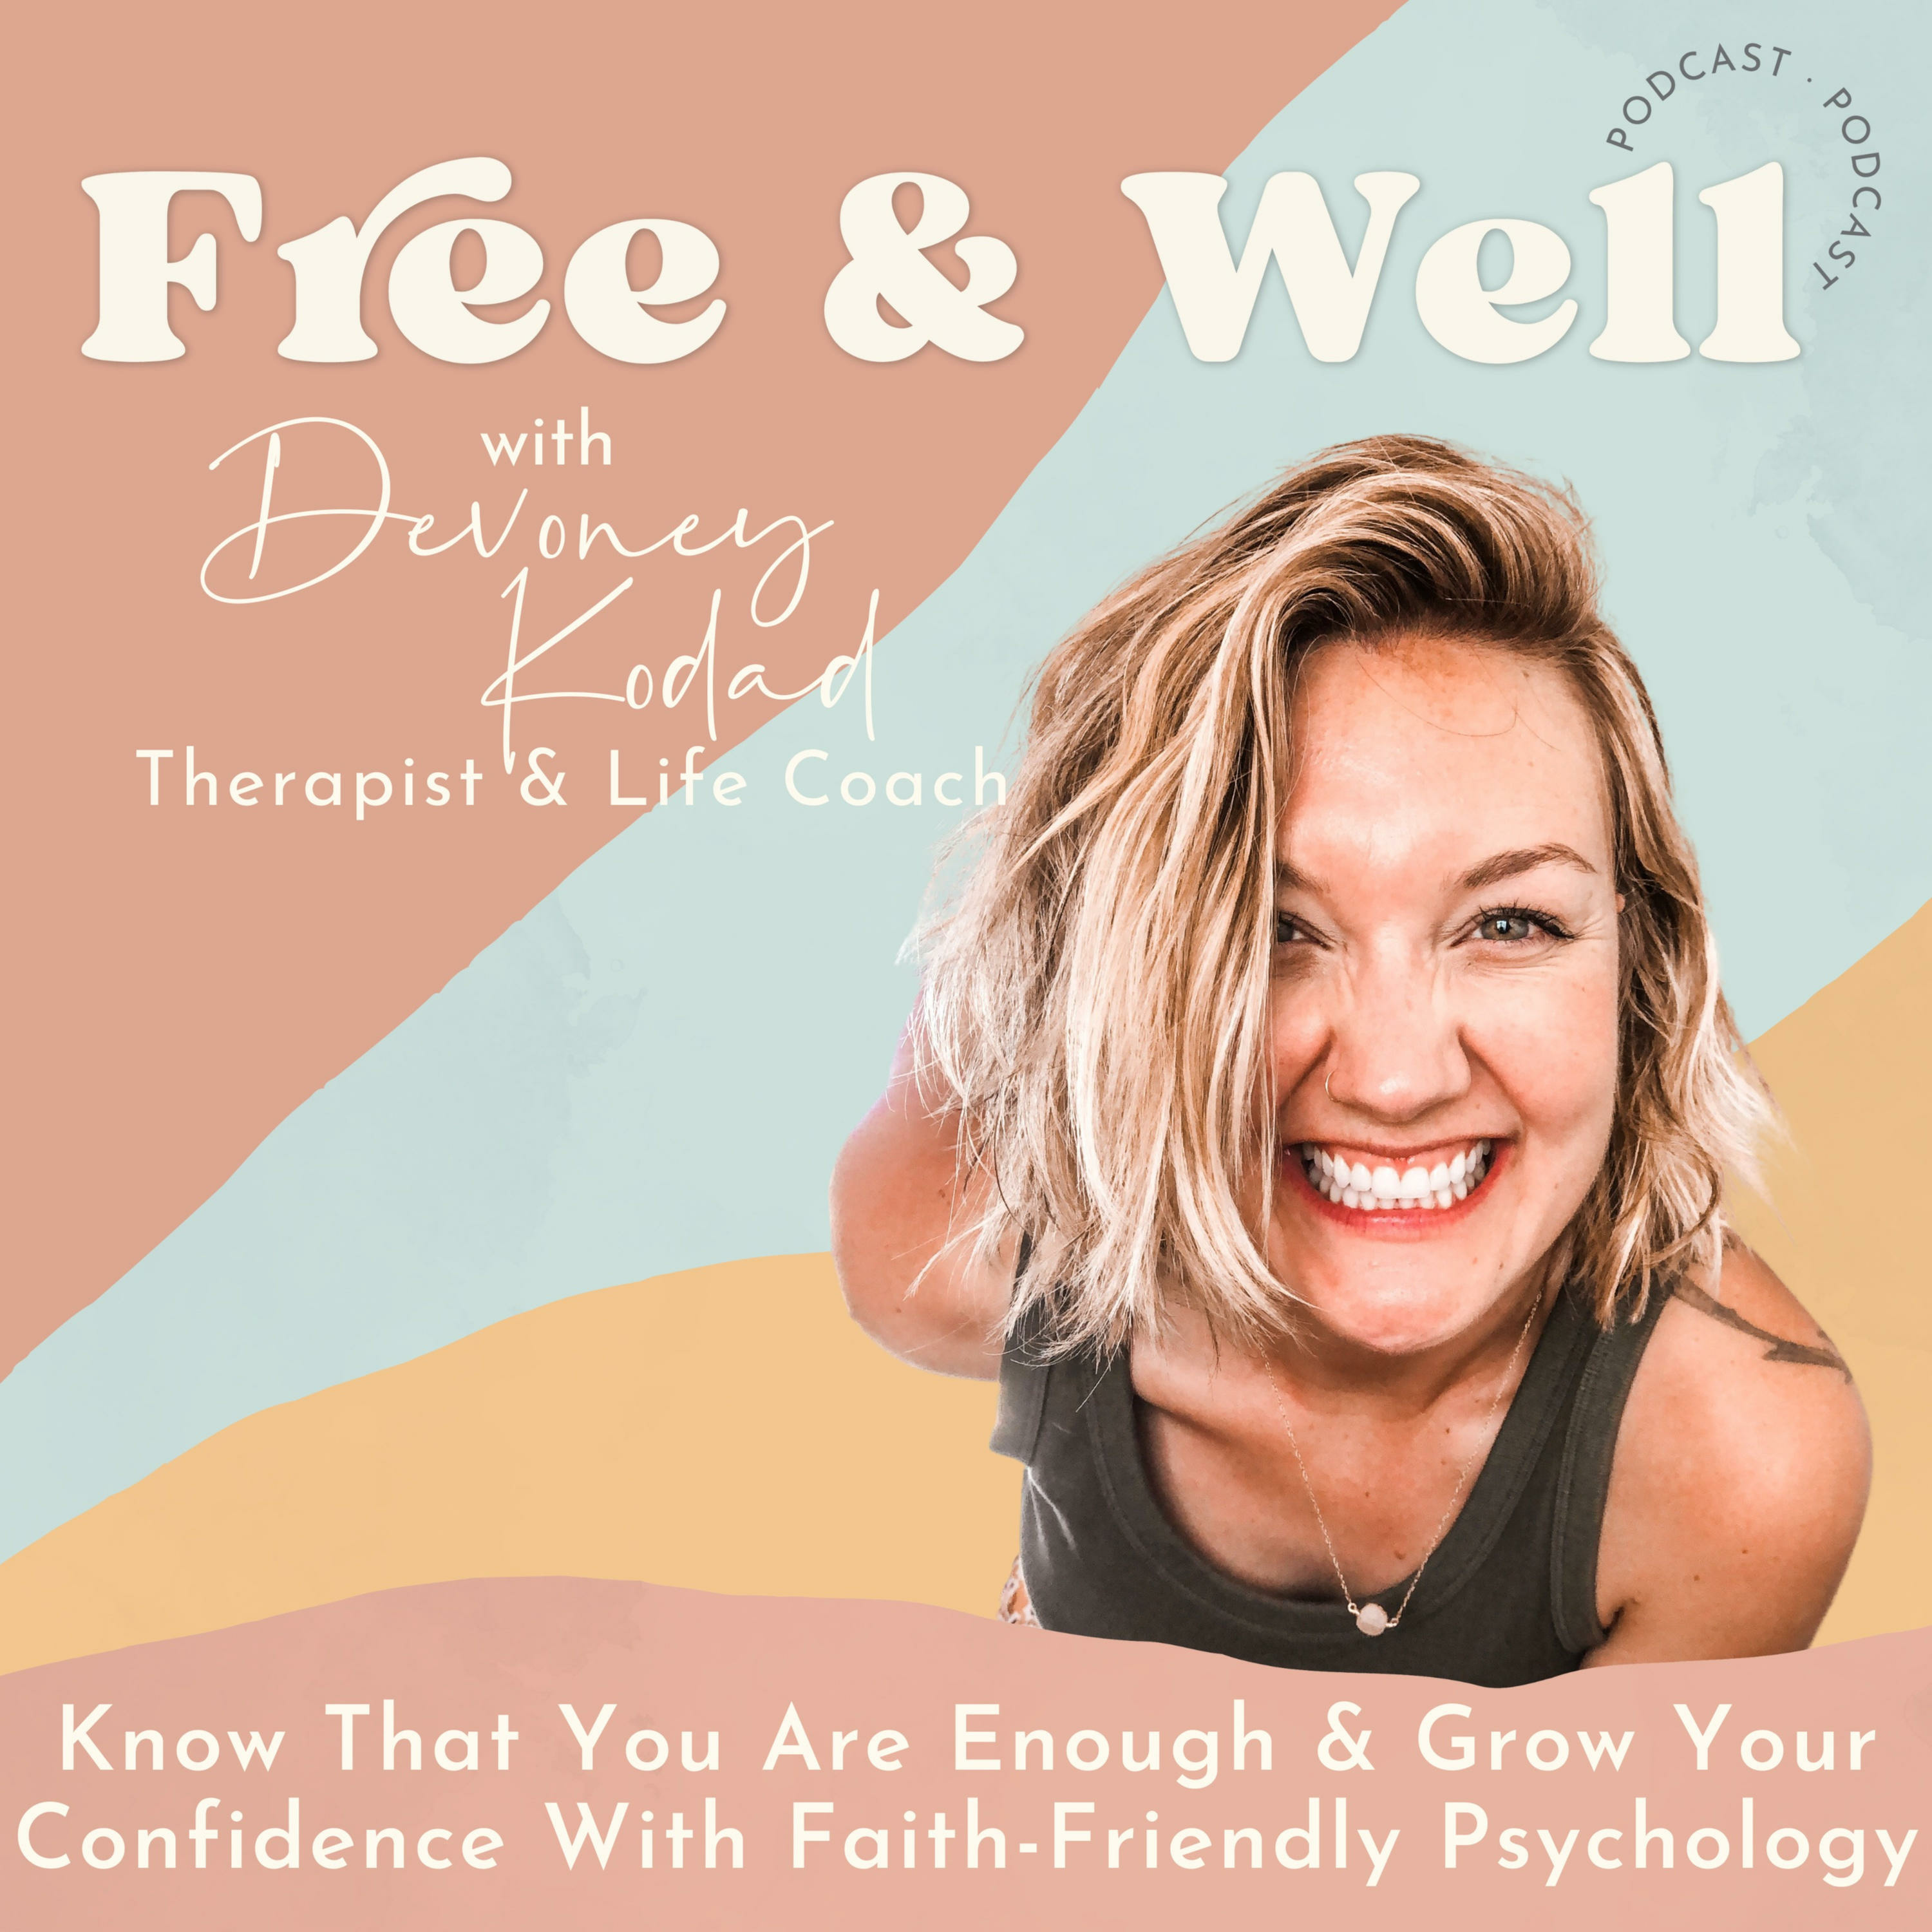 [Wake Up To Your Worth] Short Breathing & Mindfulness Practice for Anxiety to Help You Soothe Your Nervous System, Feel More Confident & Trust Yourself More (an essential daily routine)